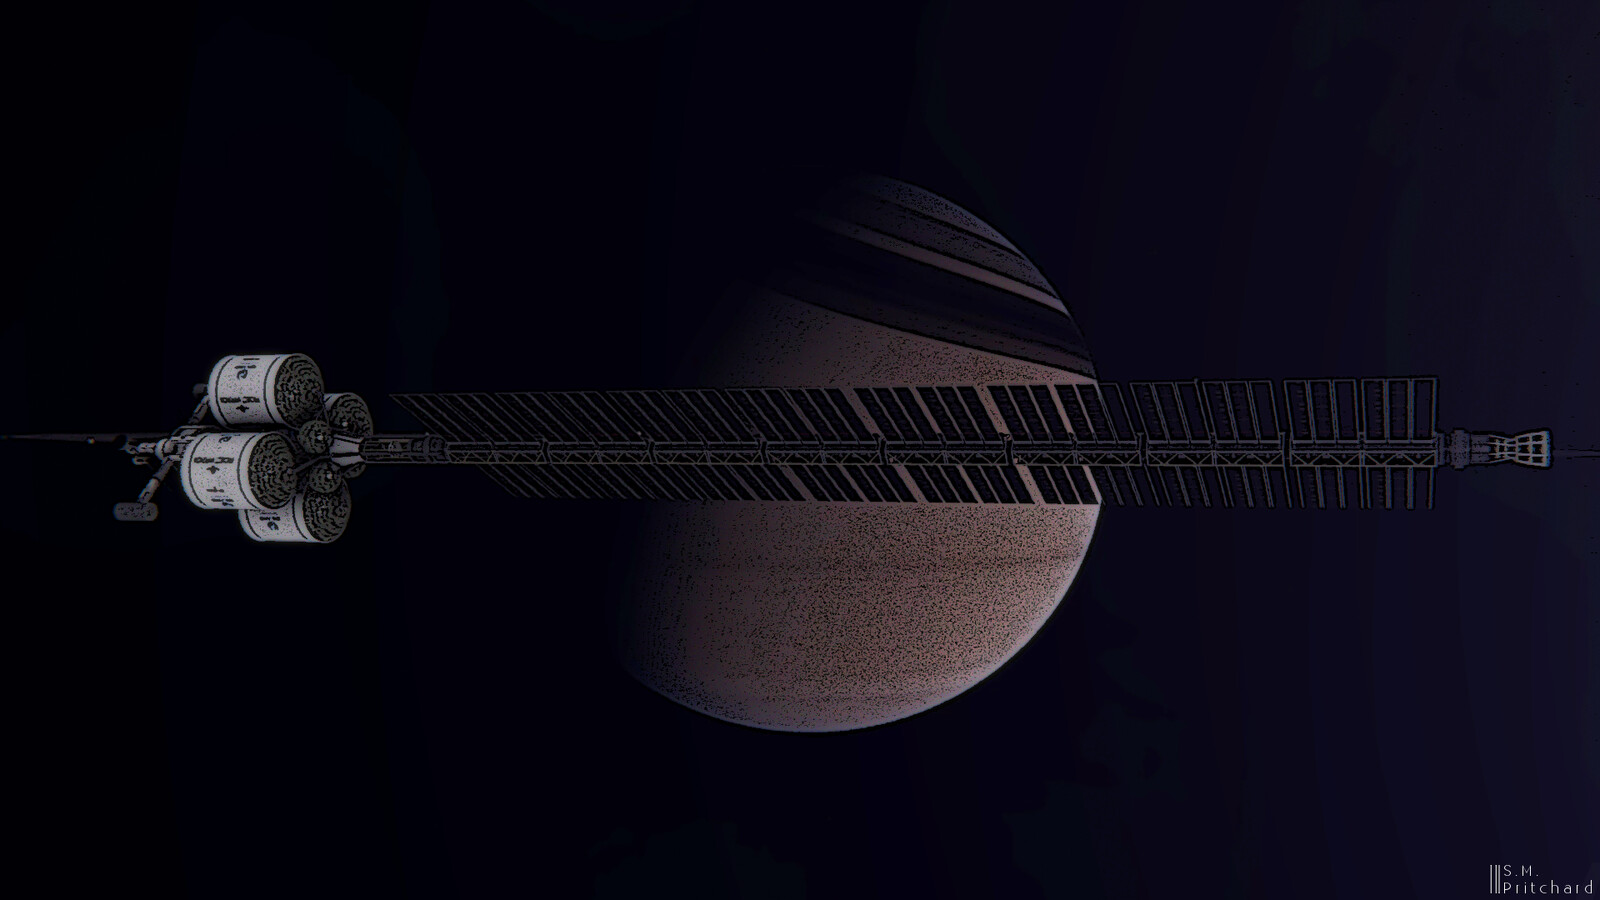 The Hyperion at Saturn, showing the full length of the fusion tube.